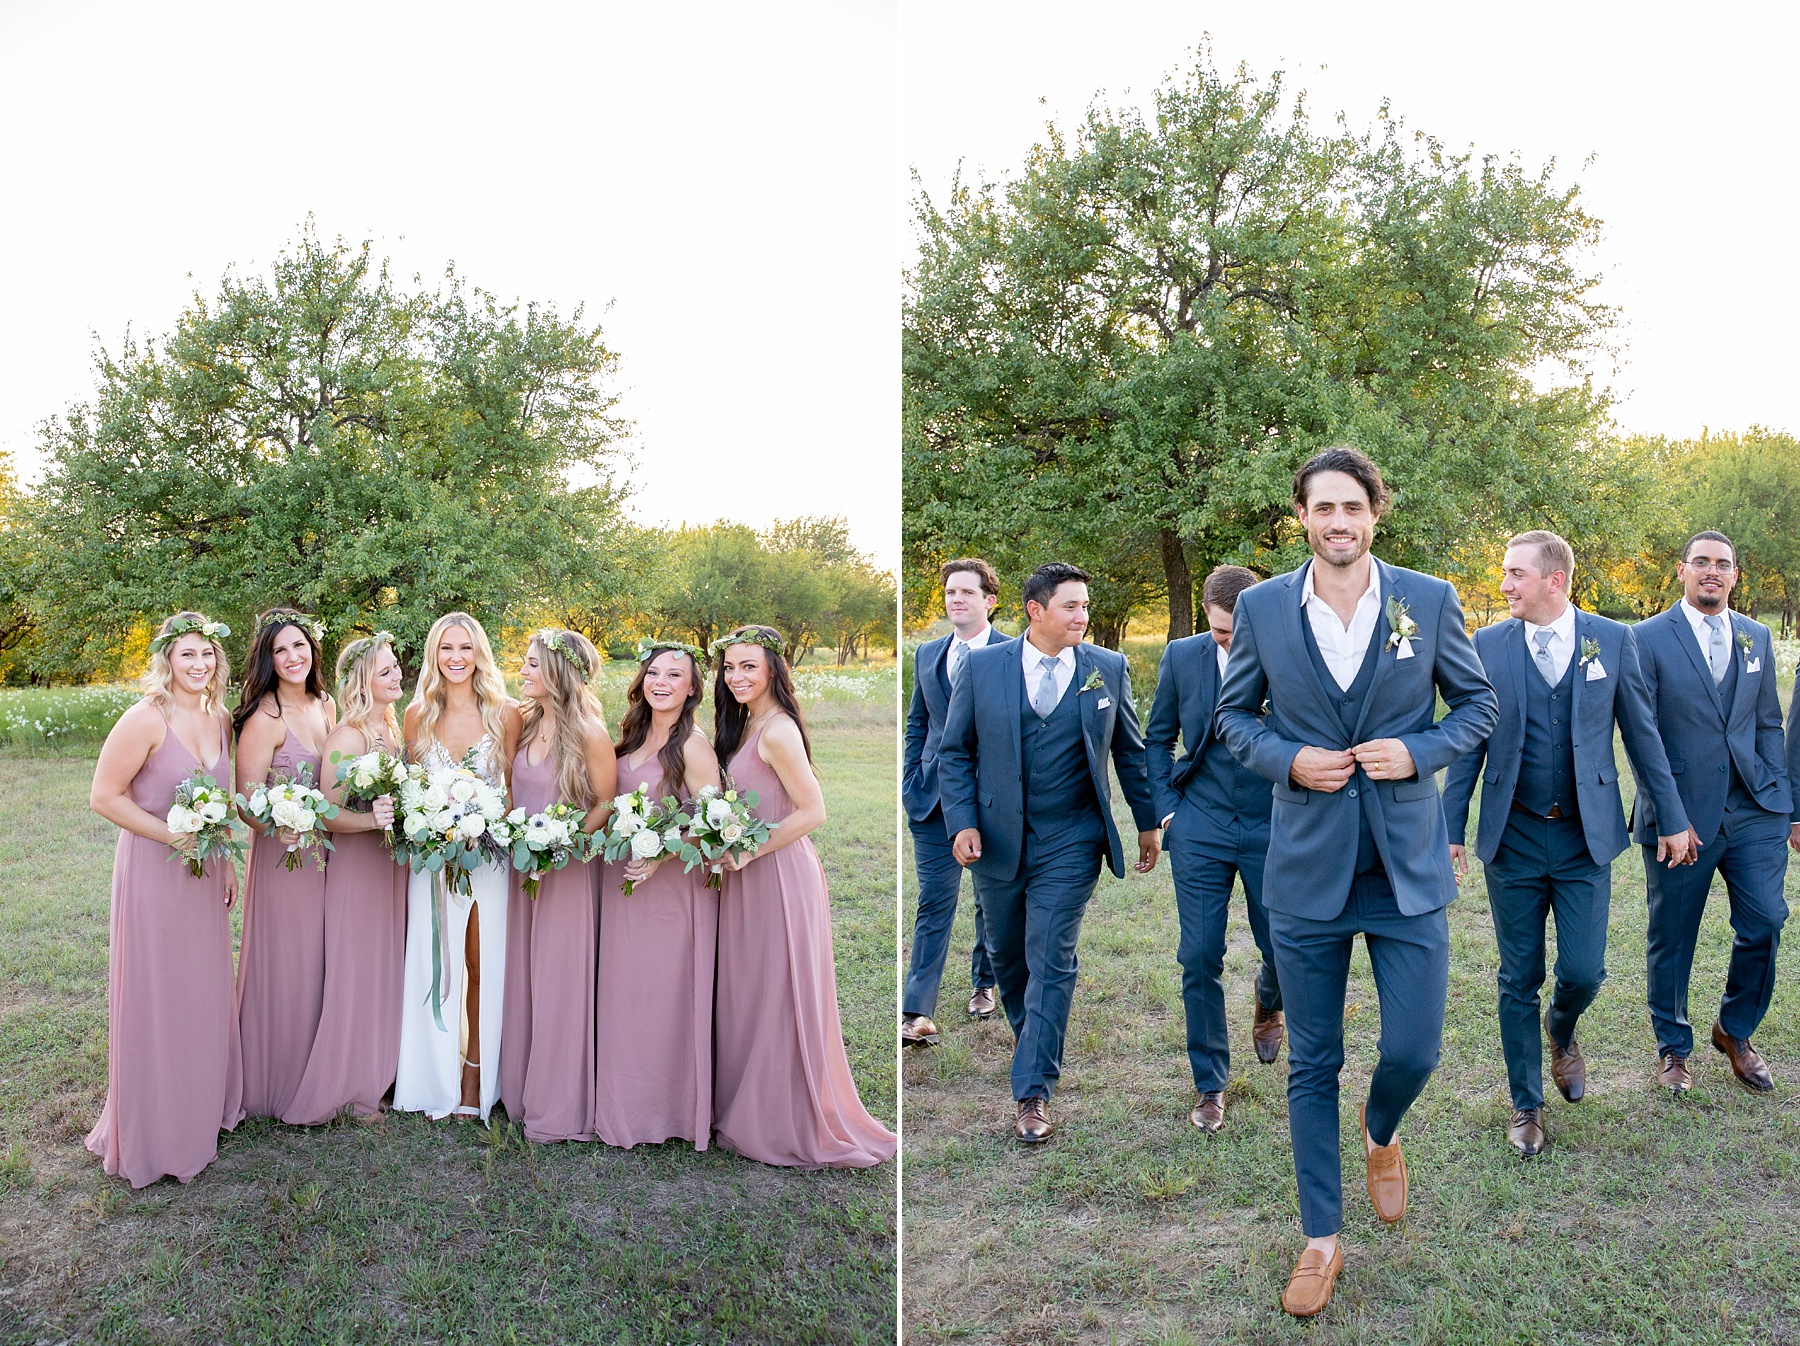 wedding party portraits in Dallas TX photographed by Randi Michelle